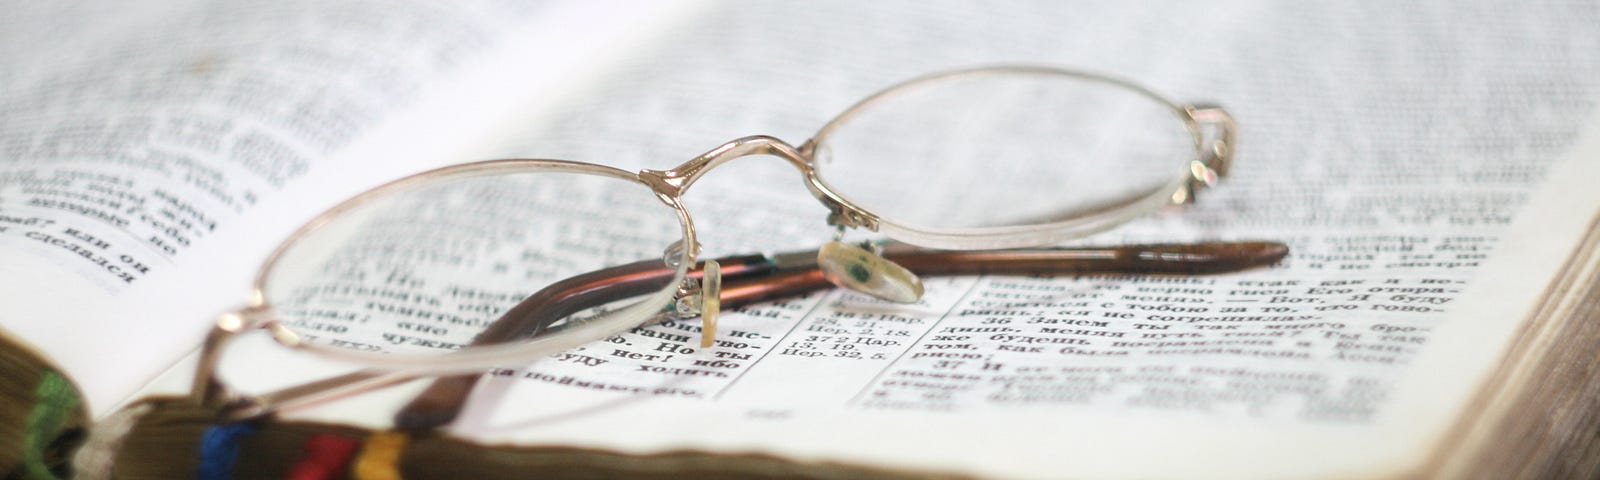 open bible with glasses on top